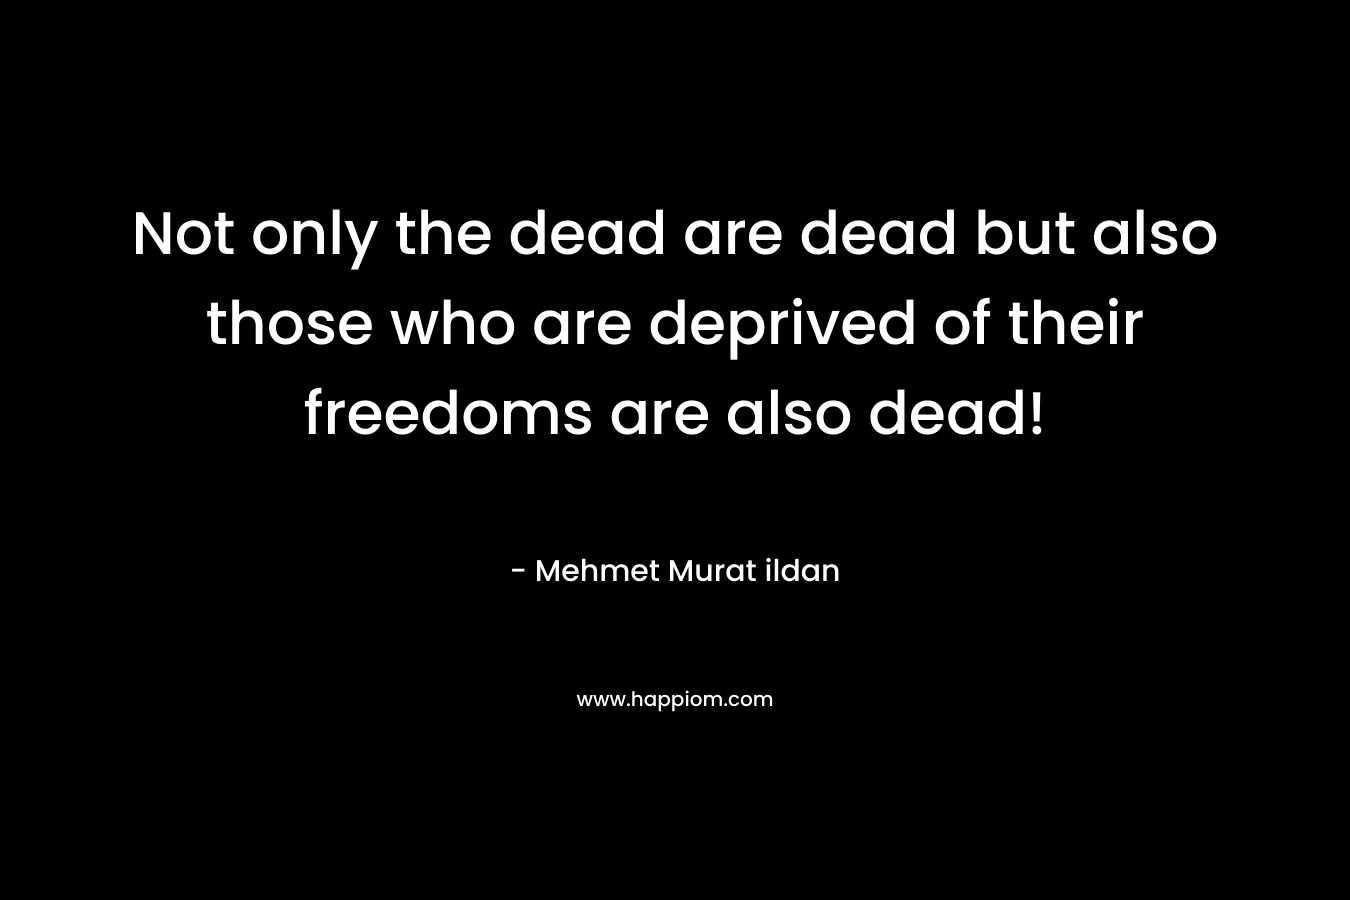 Not only the dead are dead but also those who are deprived of their freedoms are also dead!